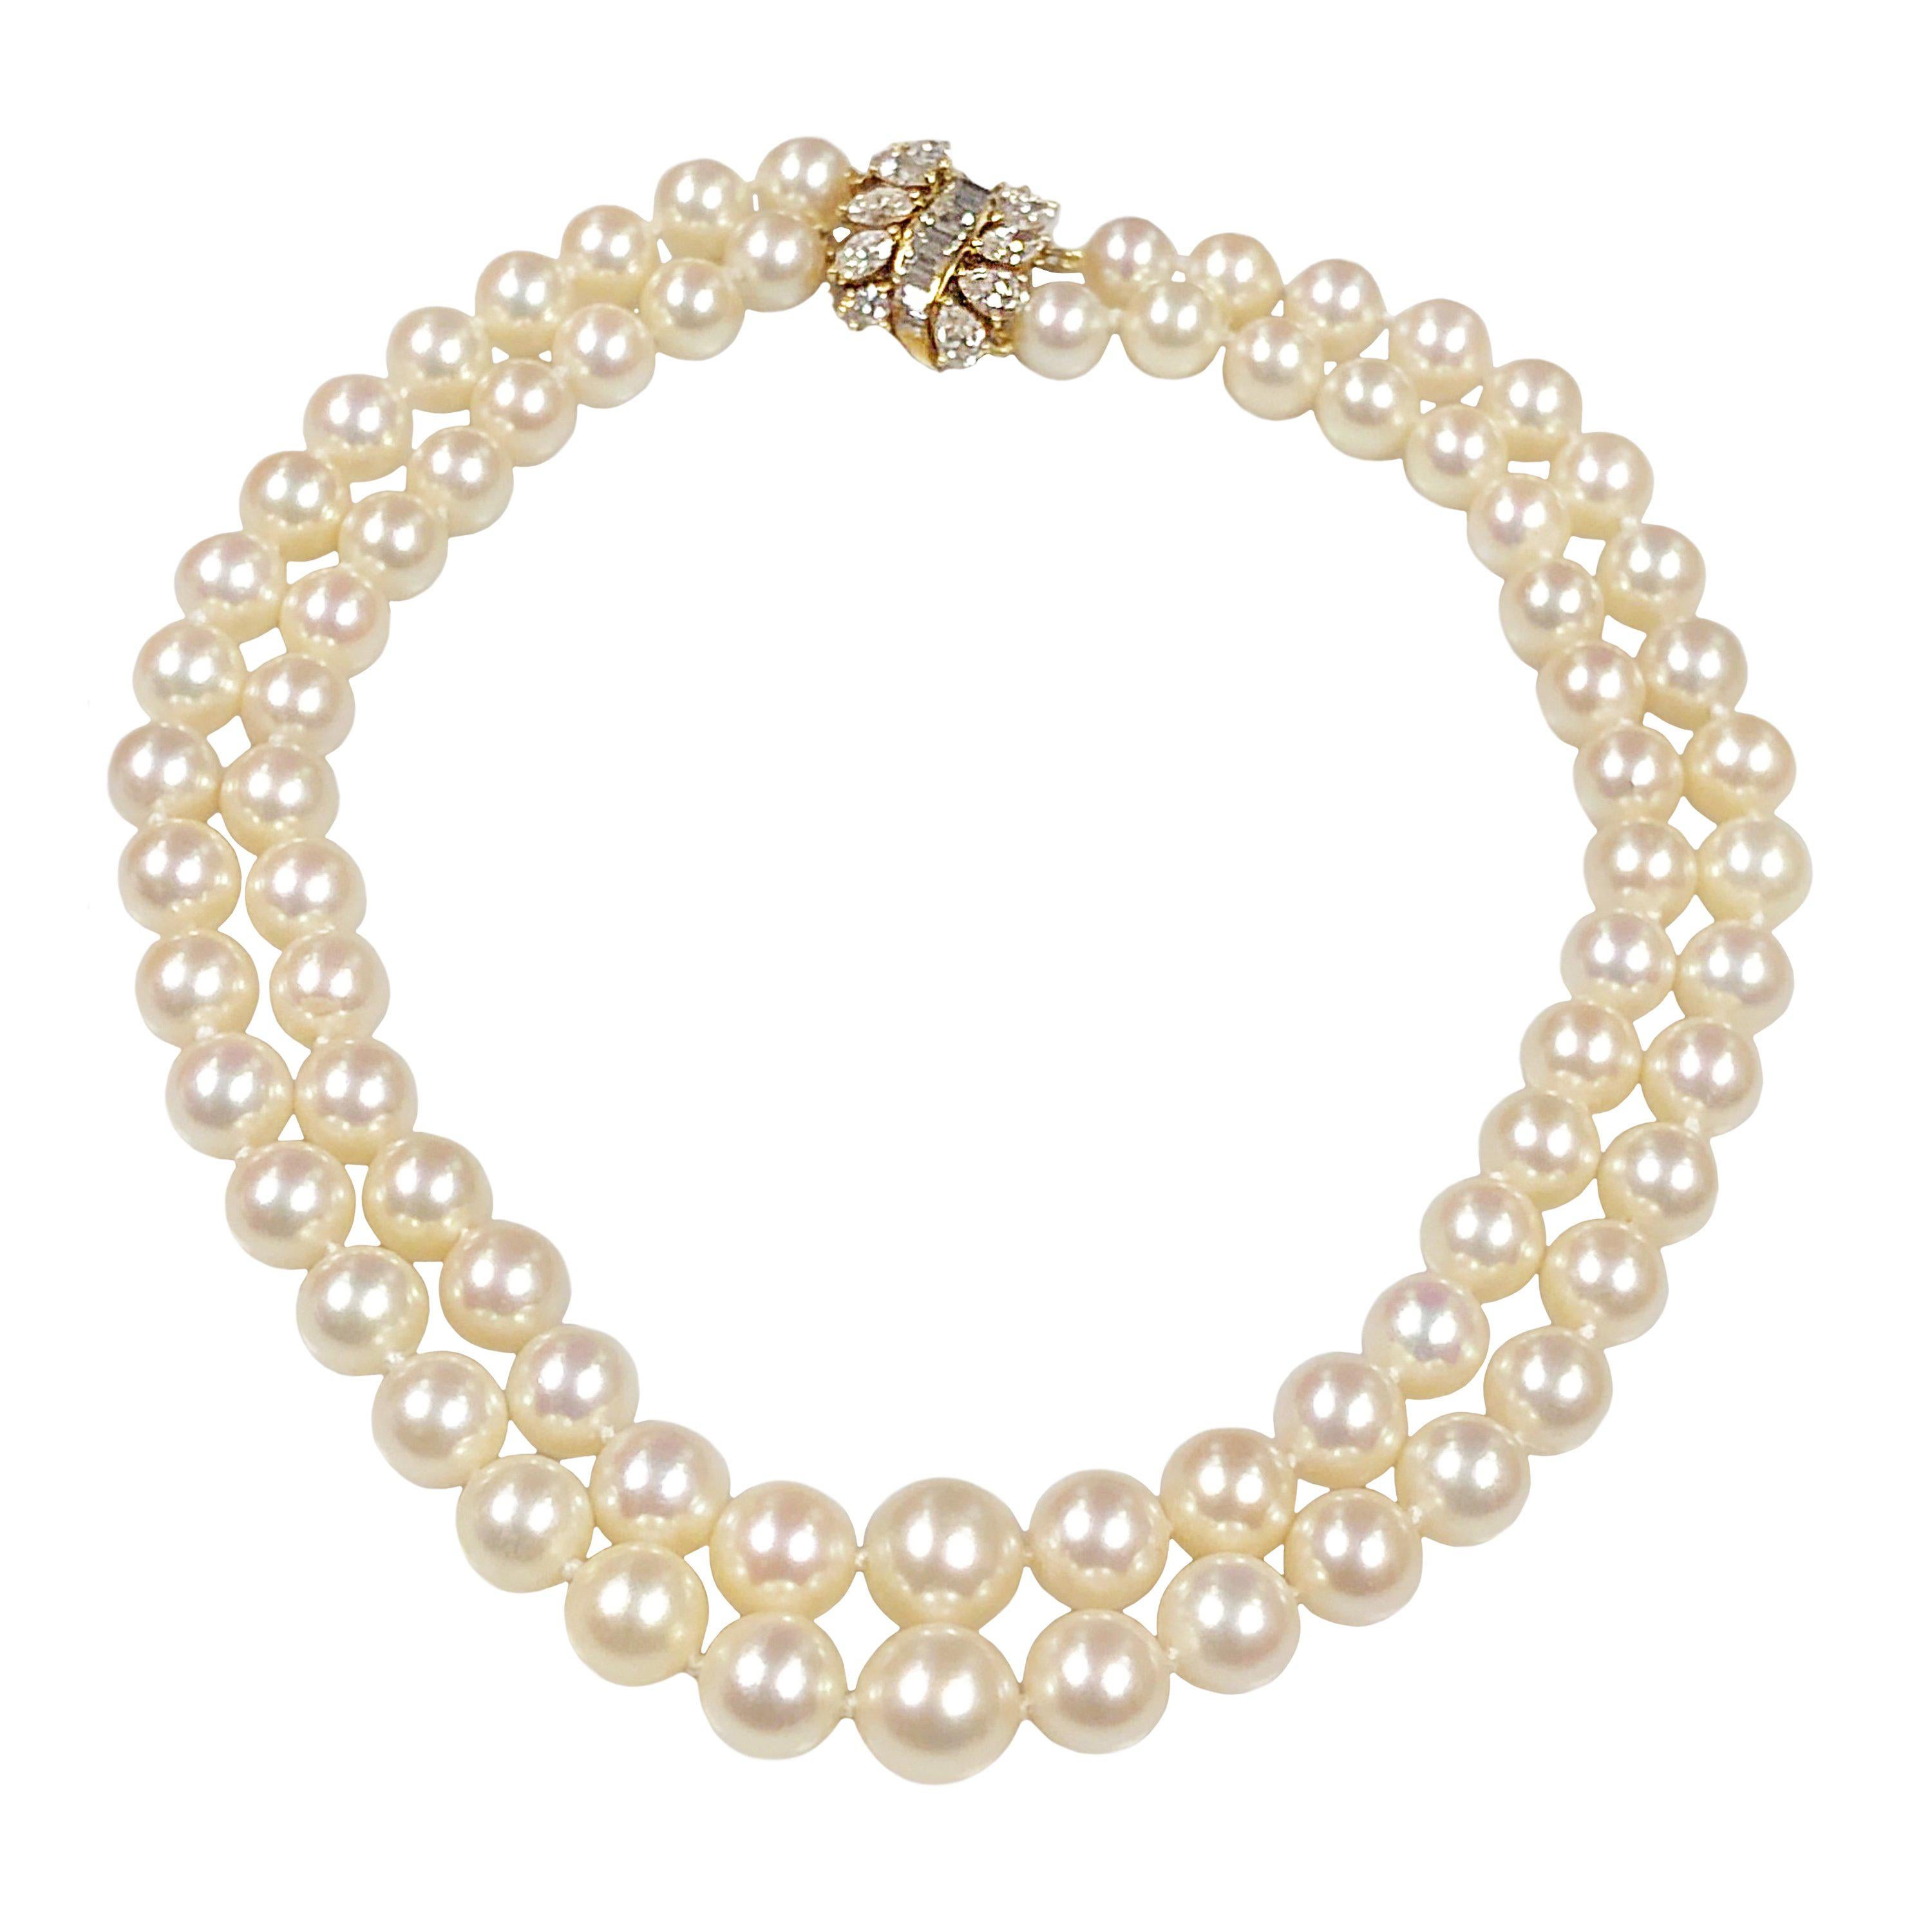 Cartier Diamond and Pearls Double Strand Necklace